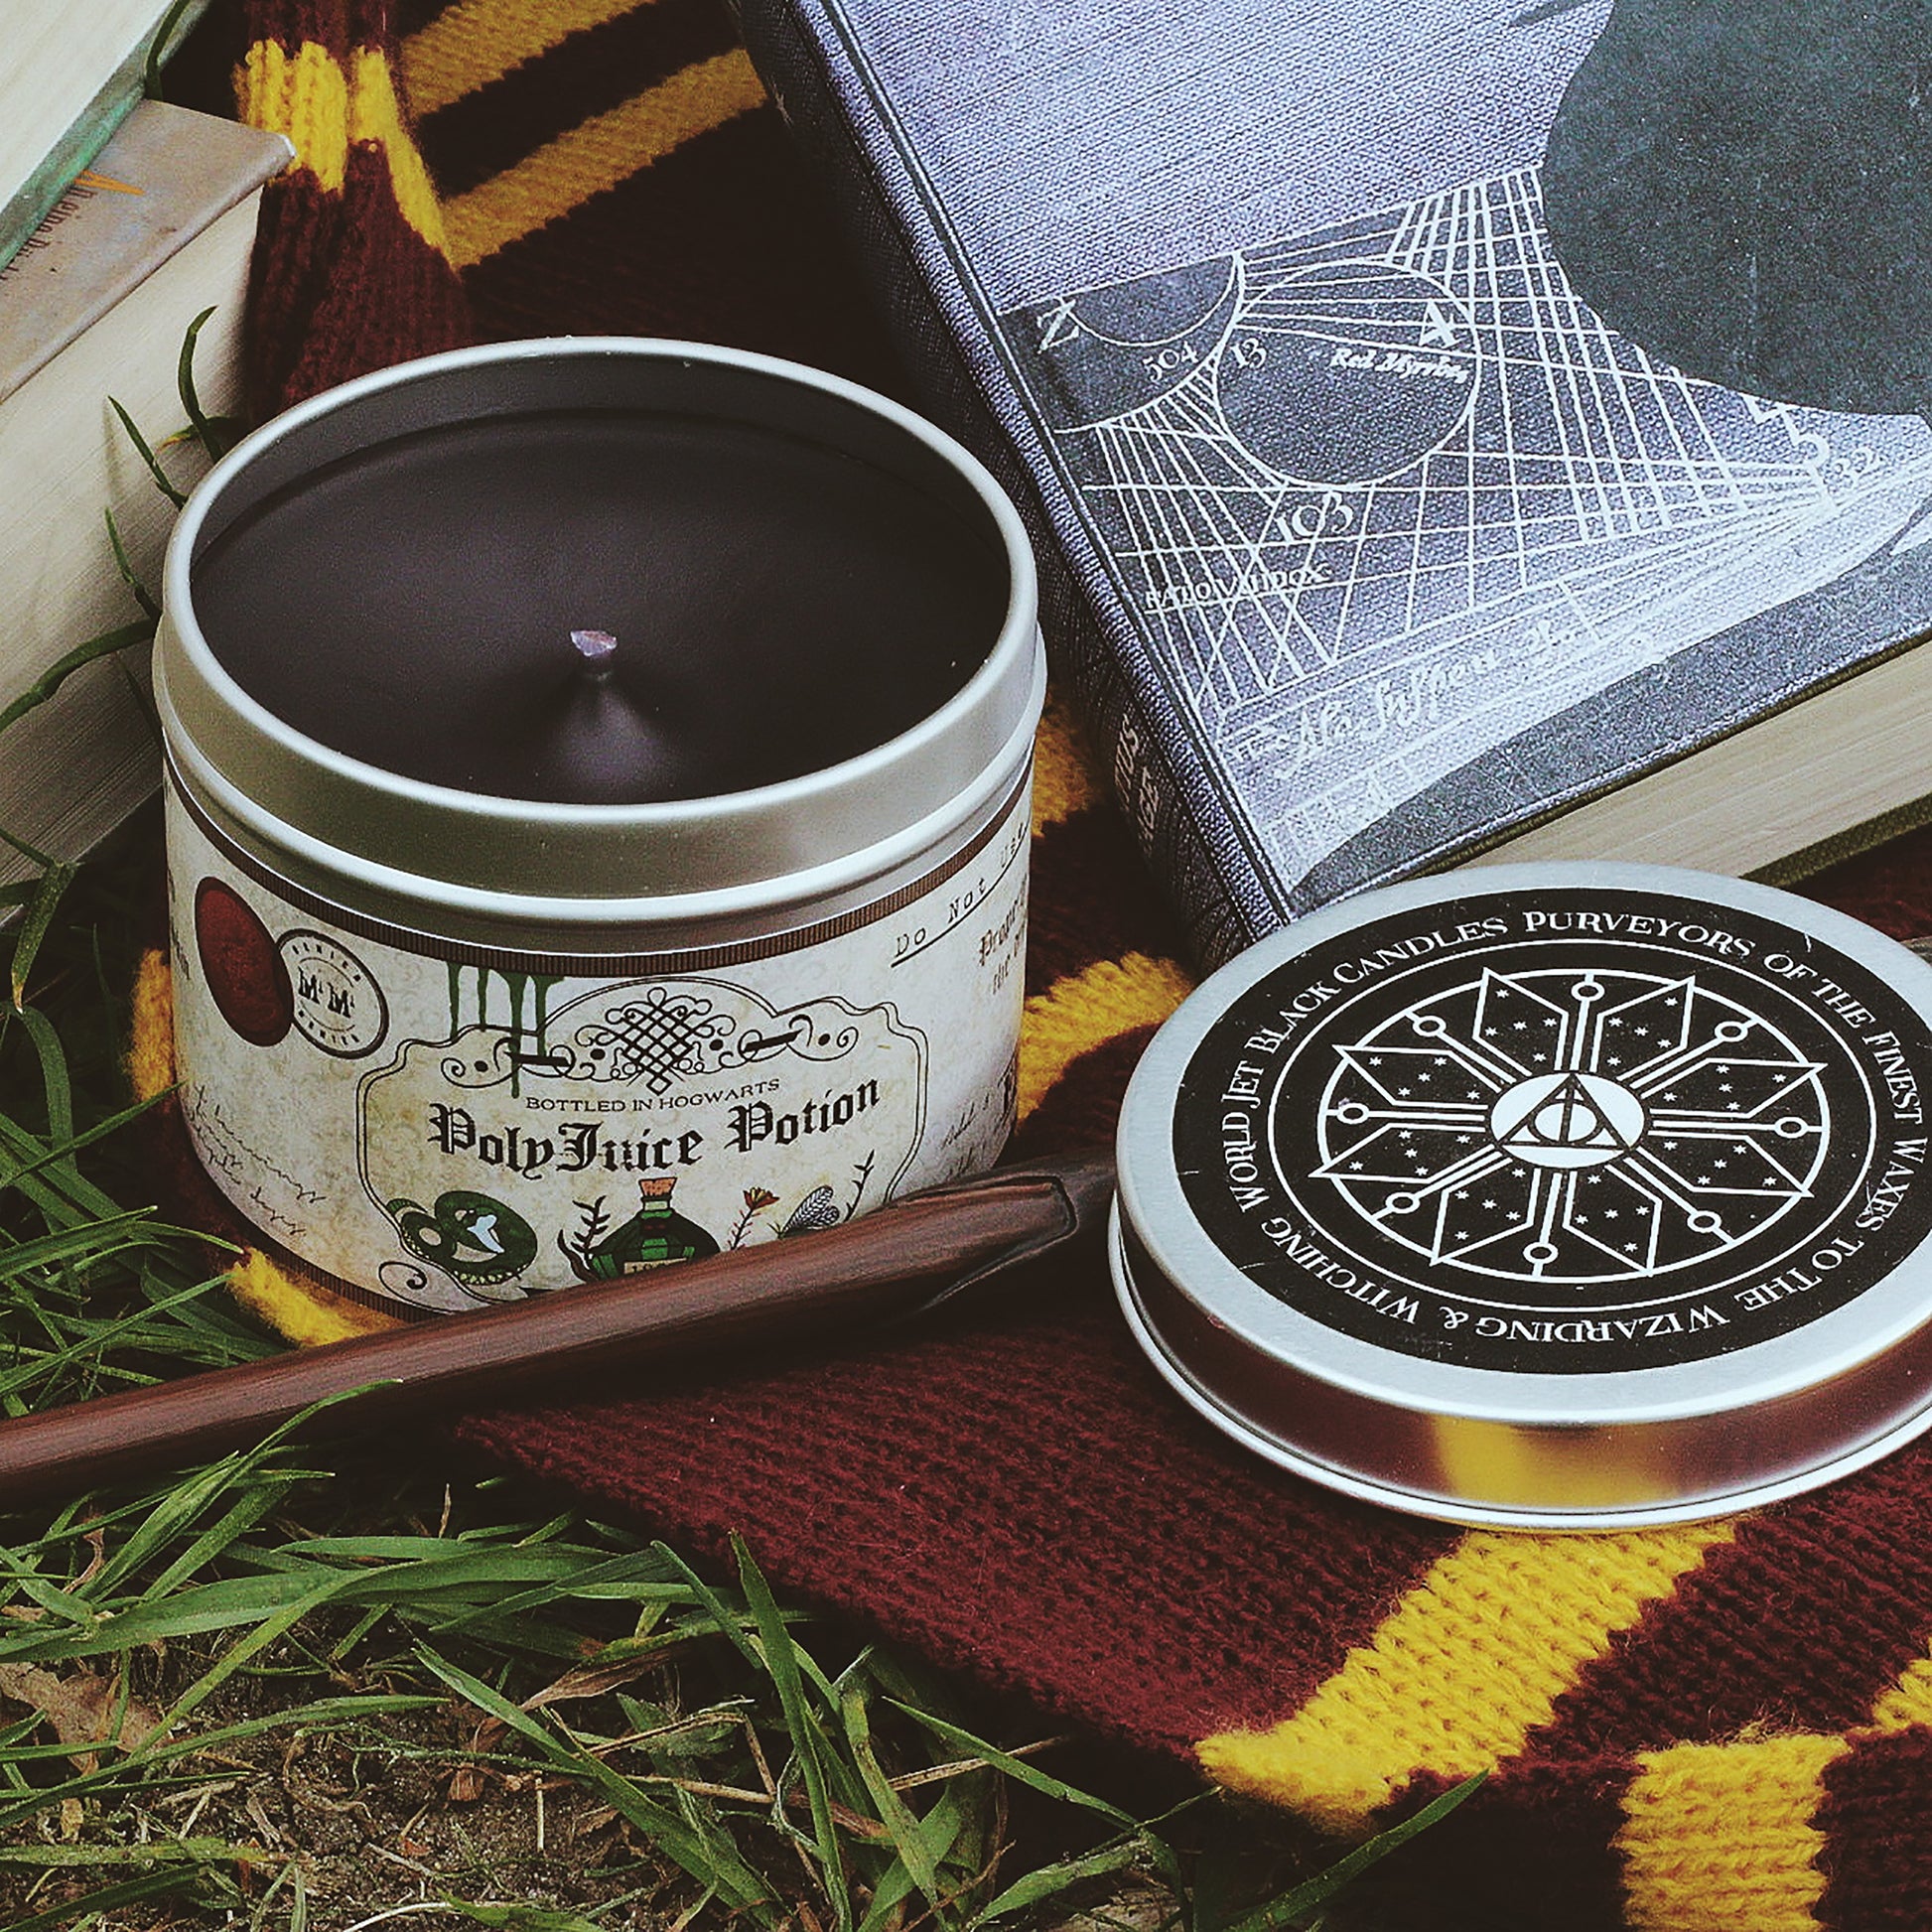 Polyjuice potion scented candle with lid off and black wax.